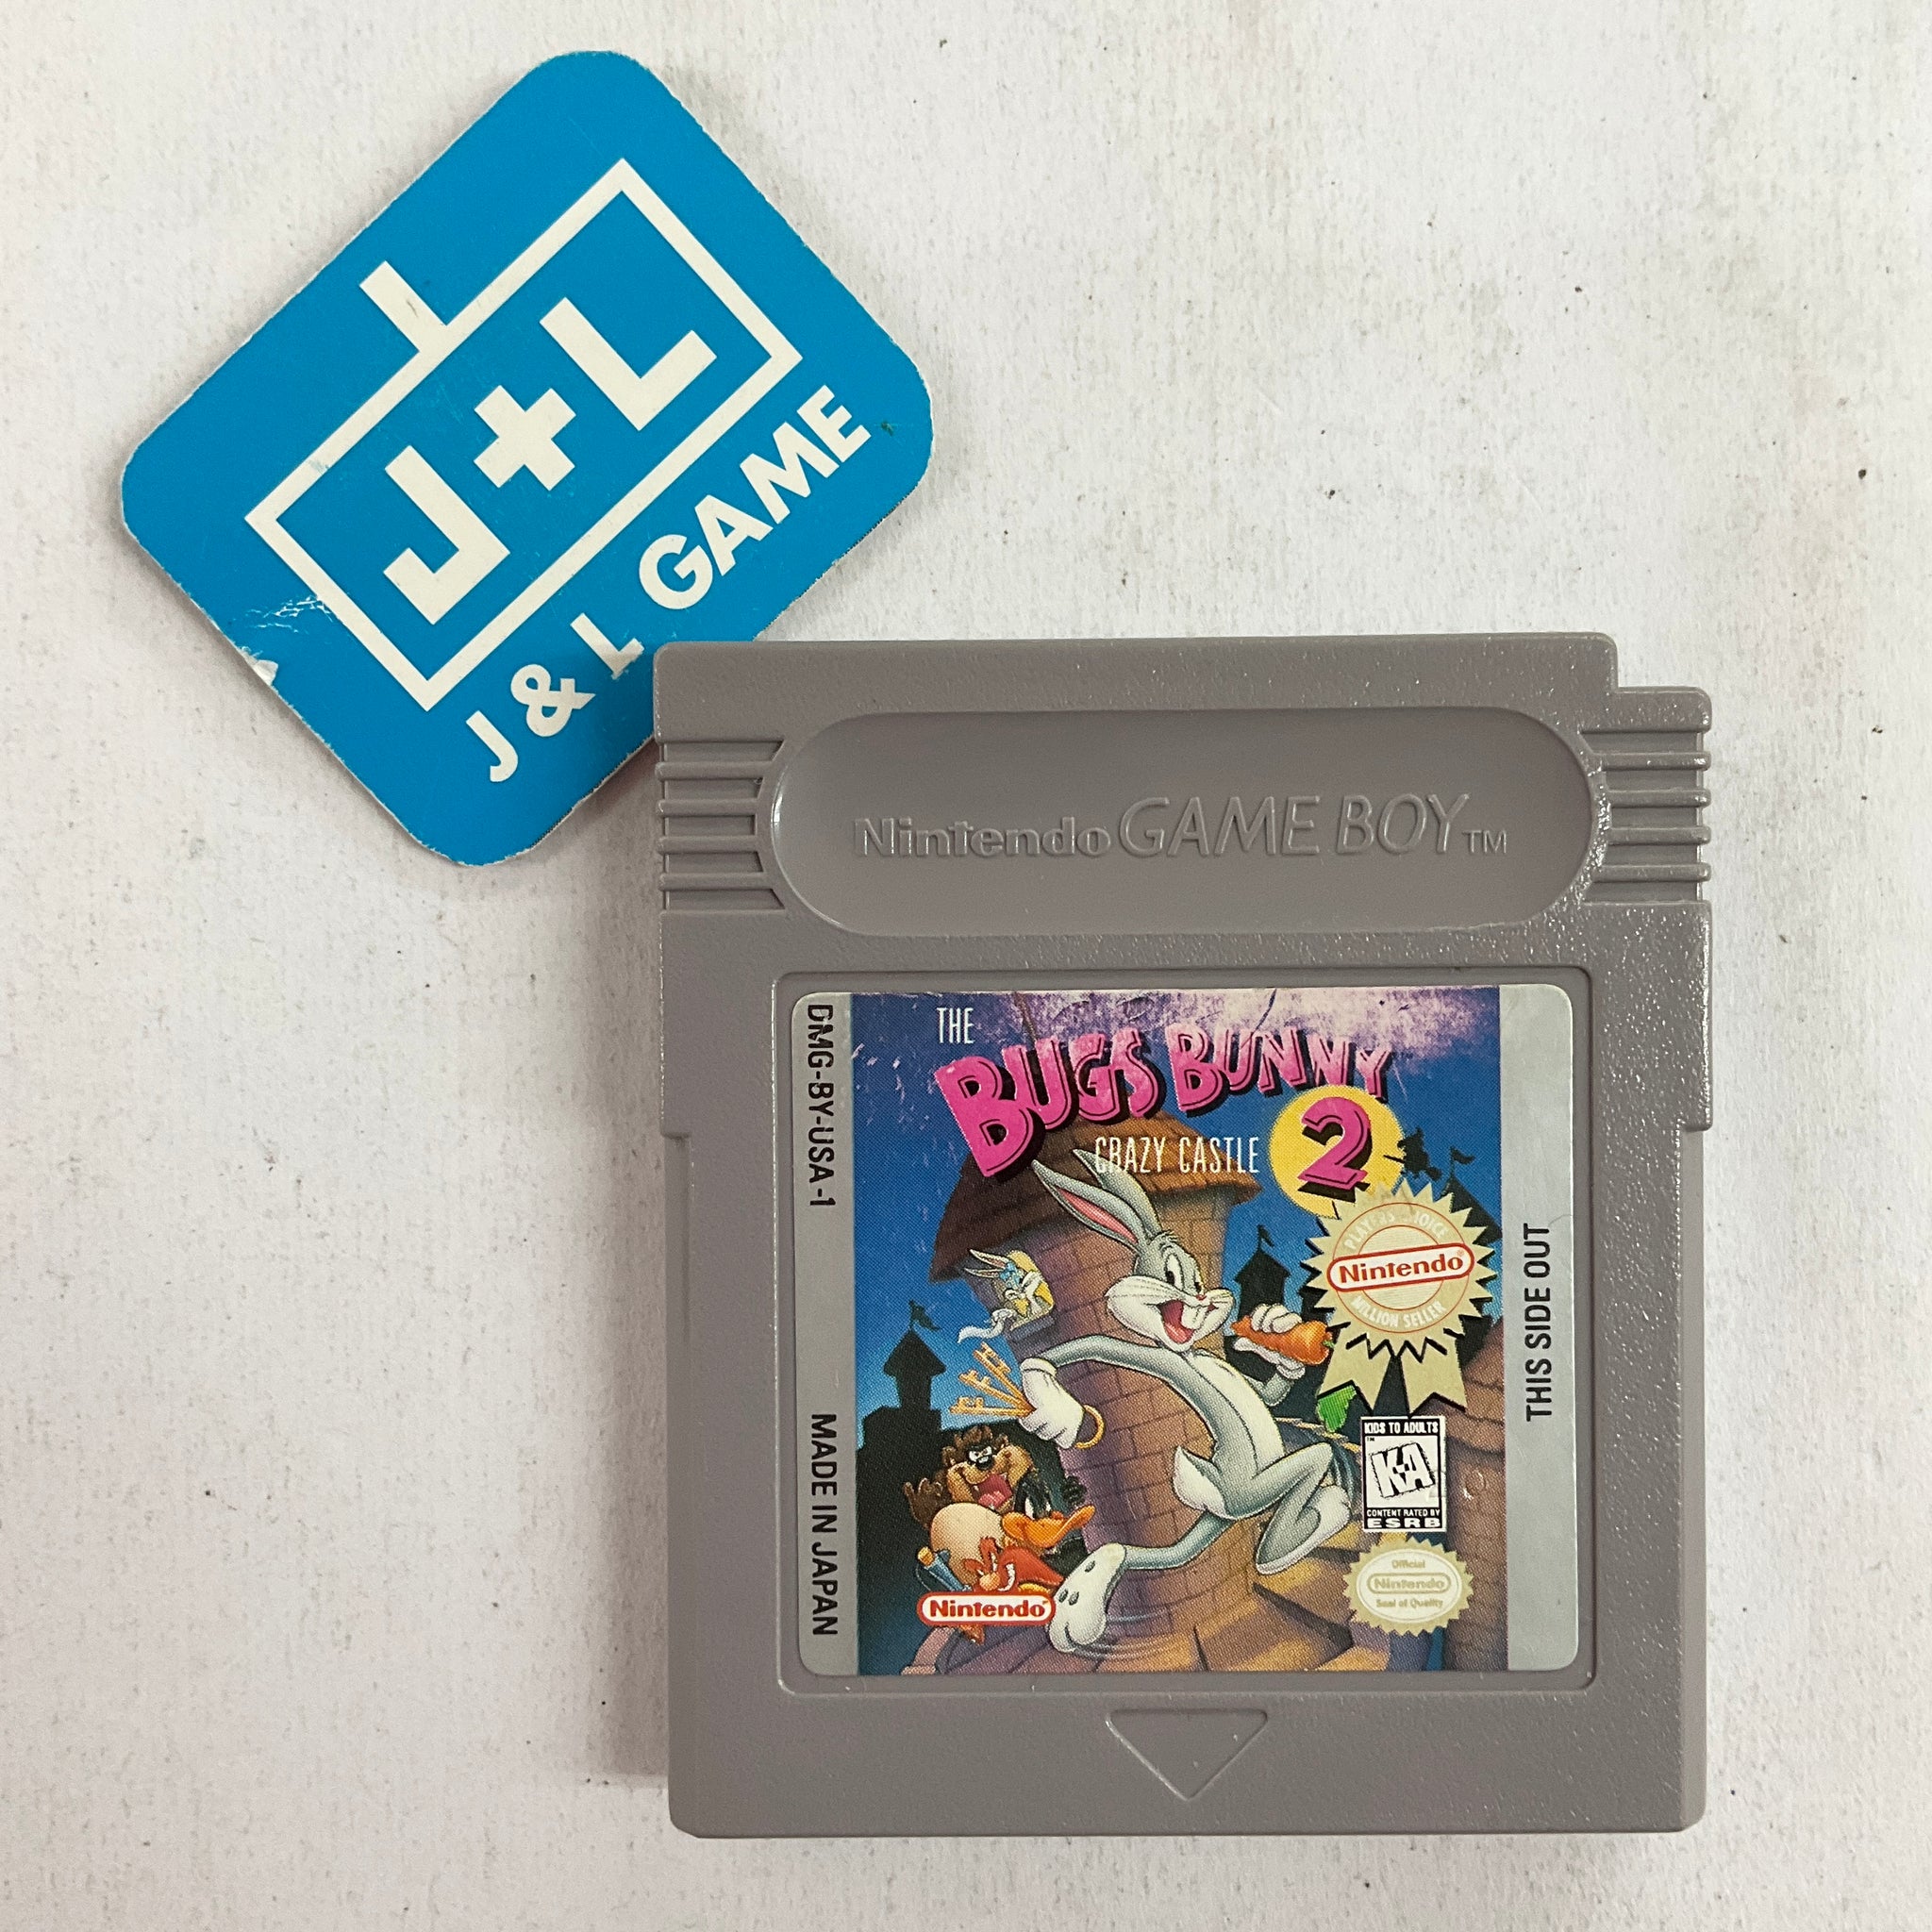 BUGS BUNNY CRAZY CASTLE 2 - NINTENDO GAMEBOY - GAME ONLY